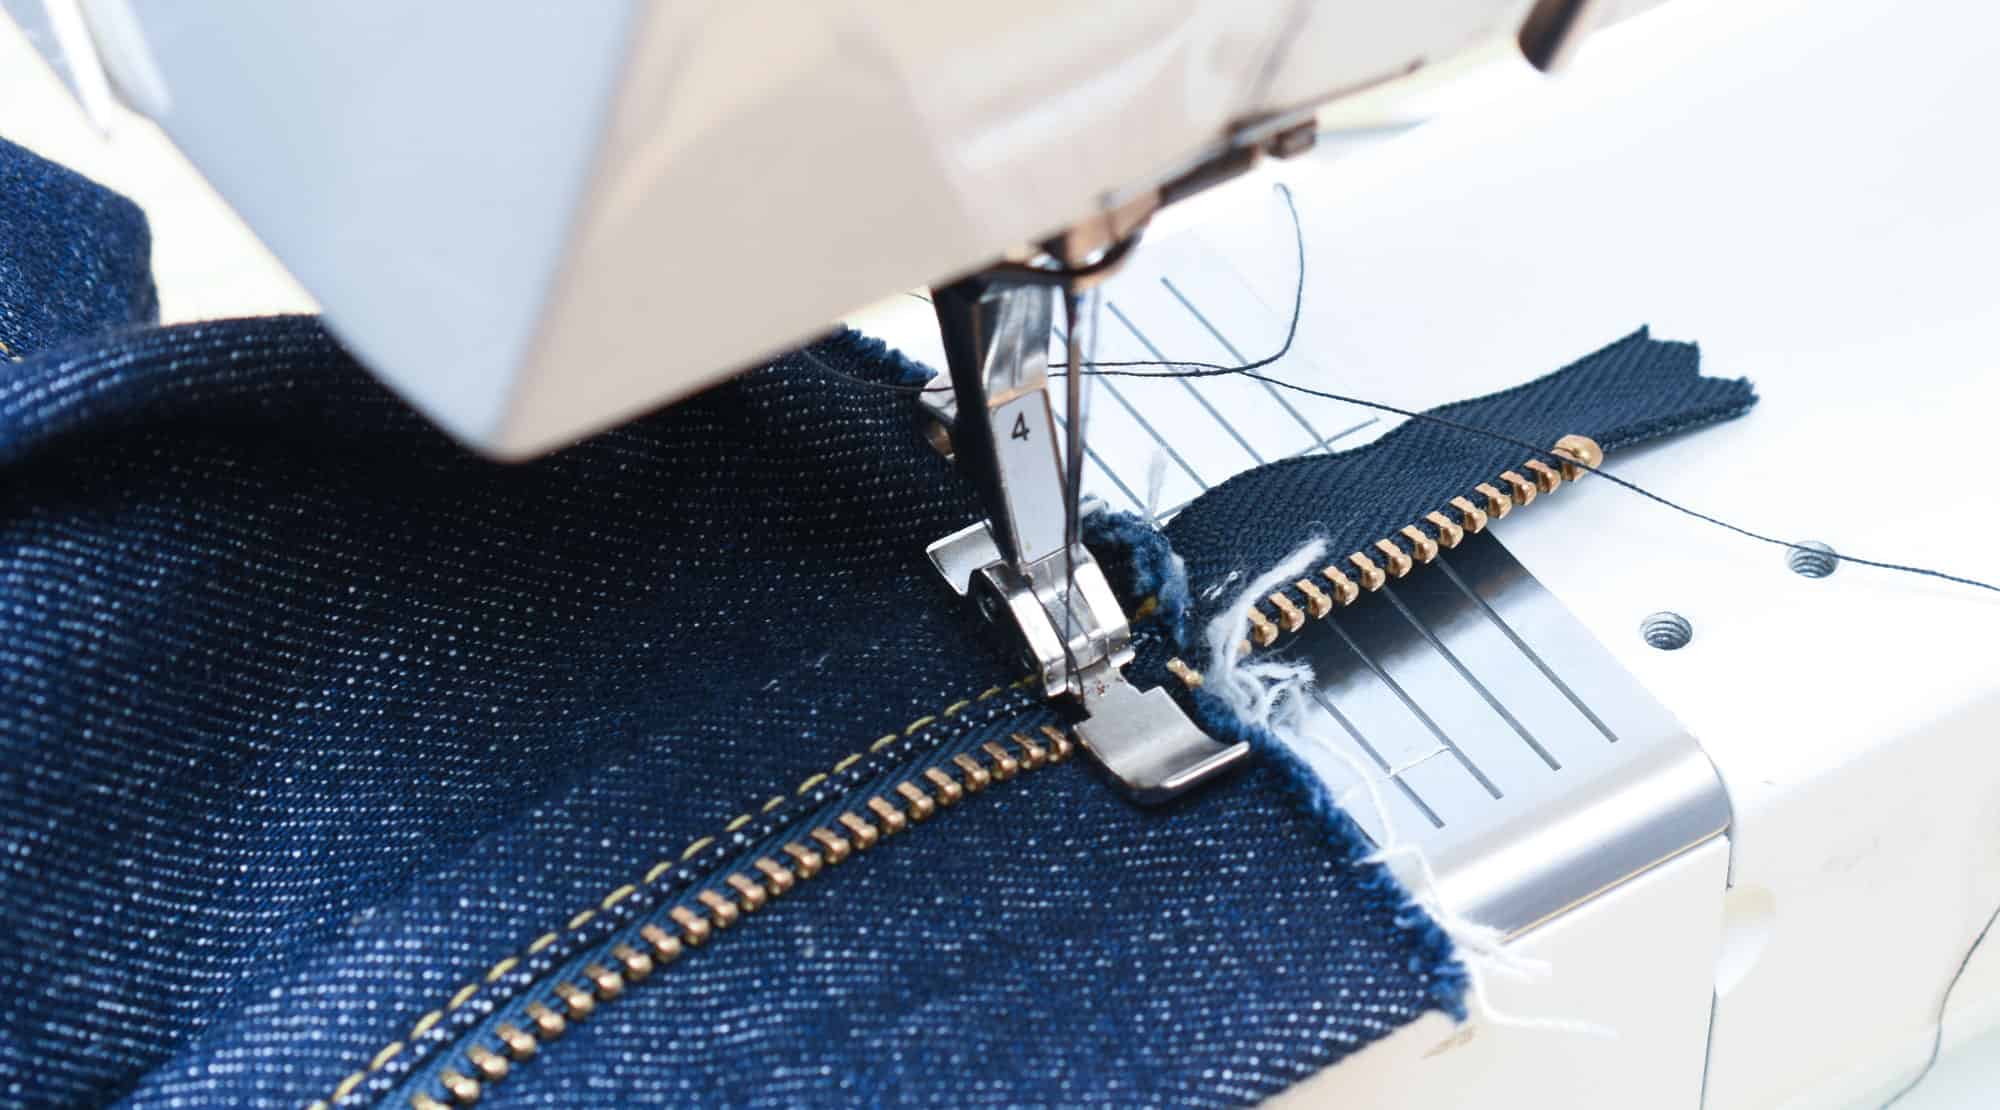 Sewing a beautiful jeans waistband using professional techniques